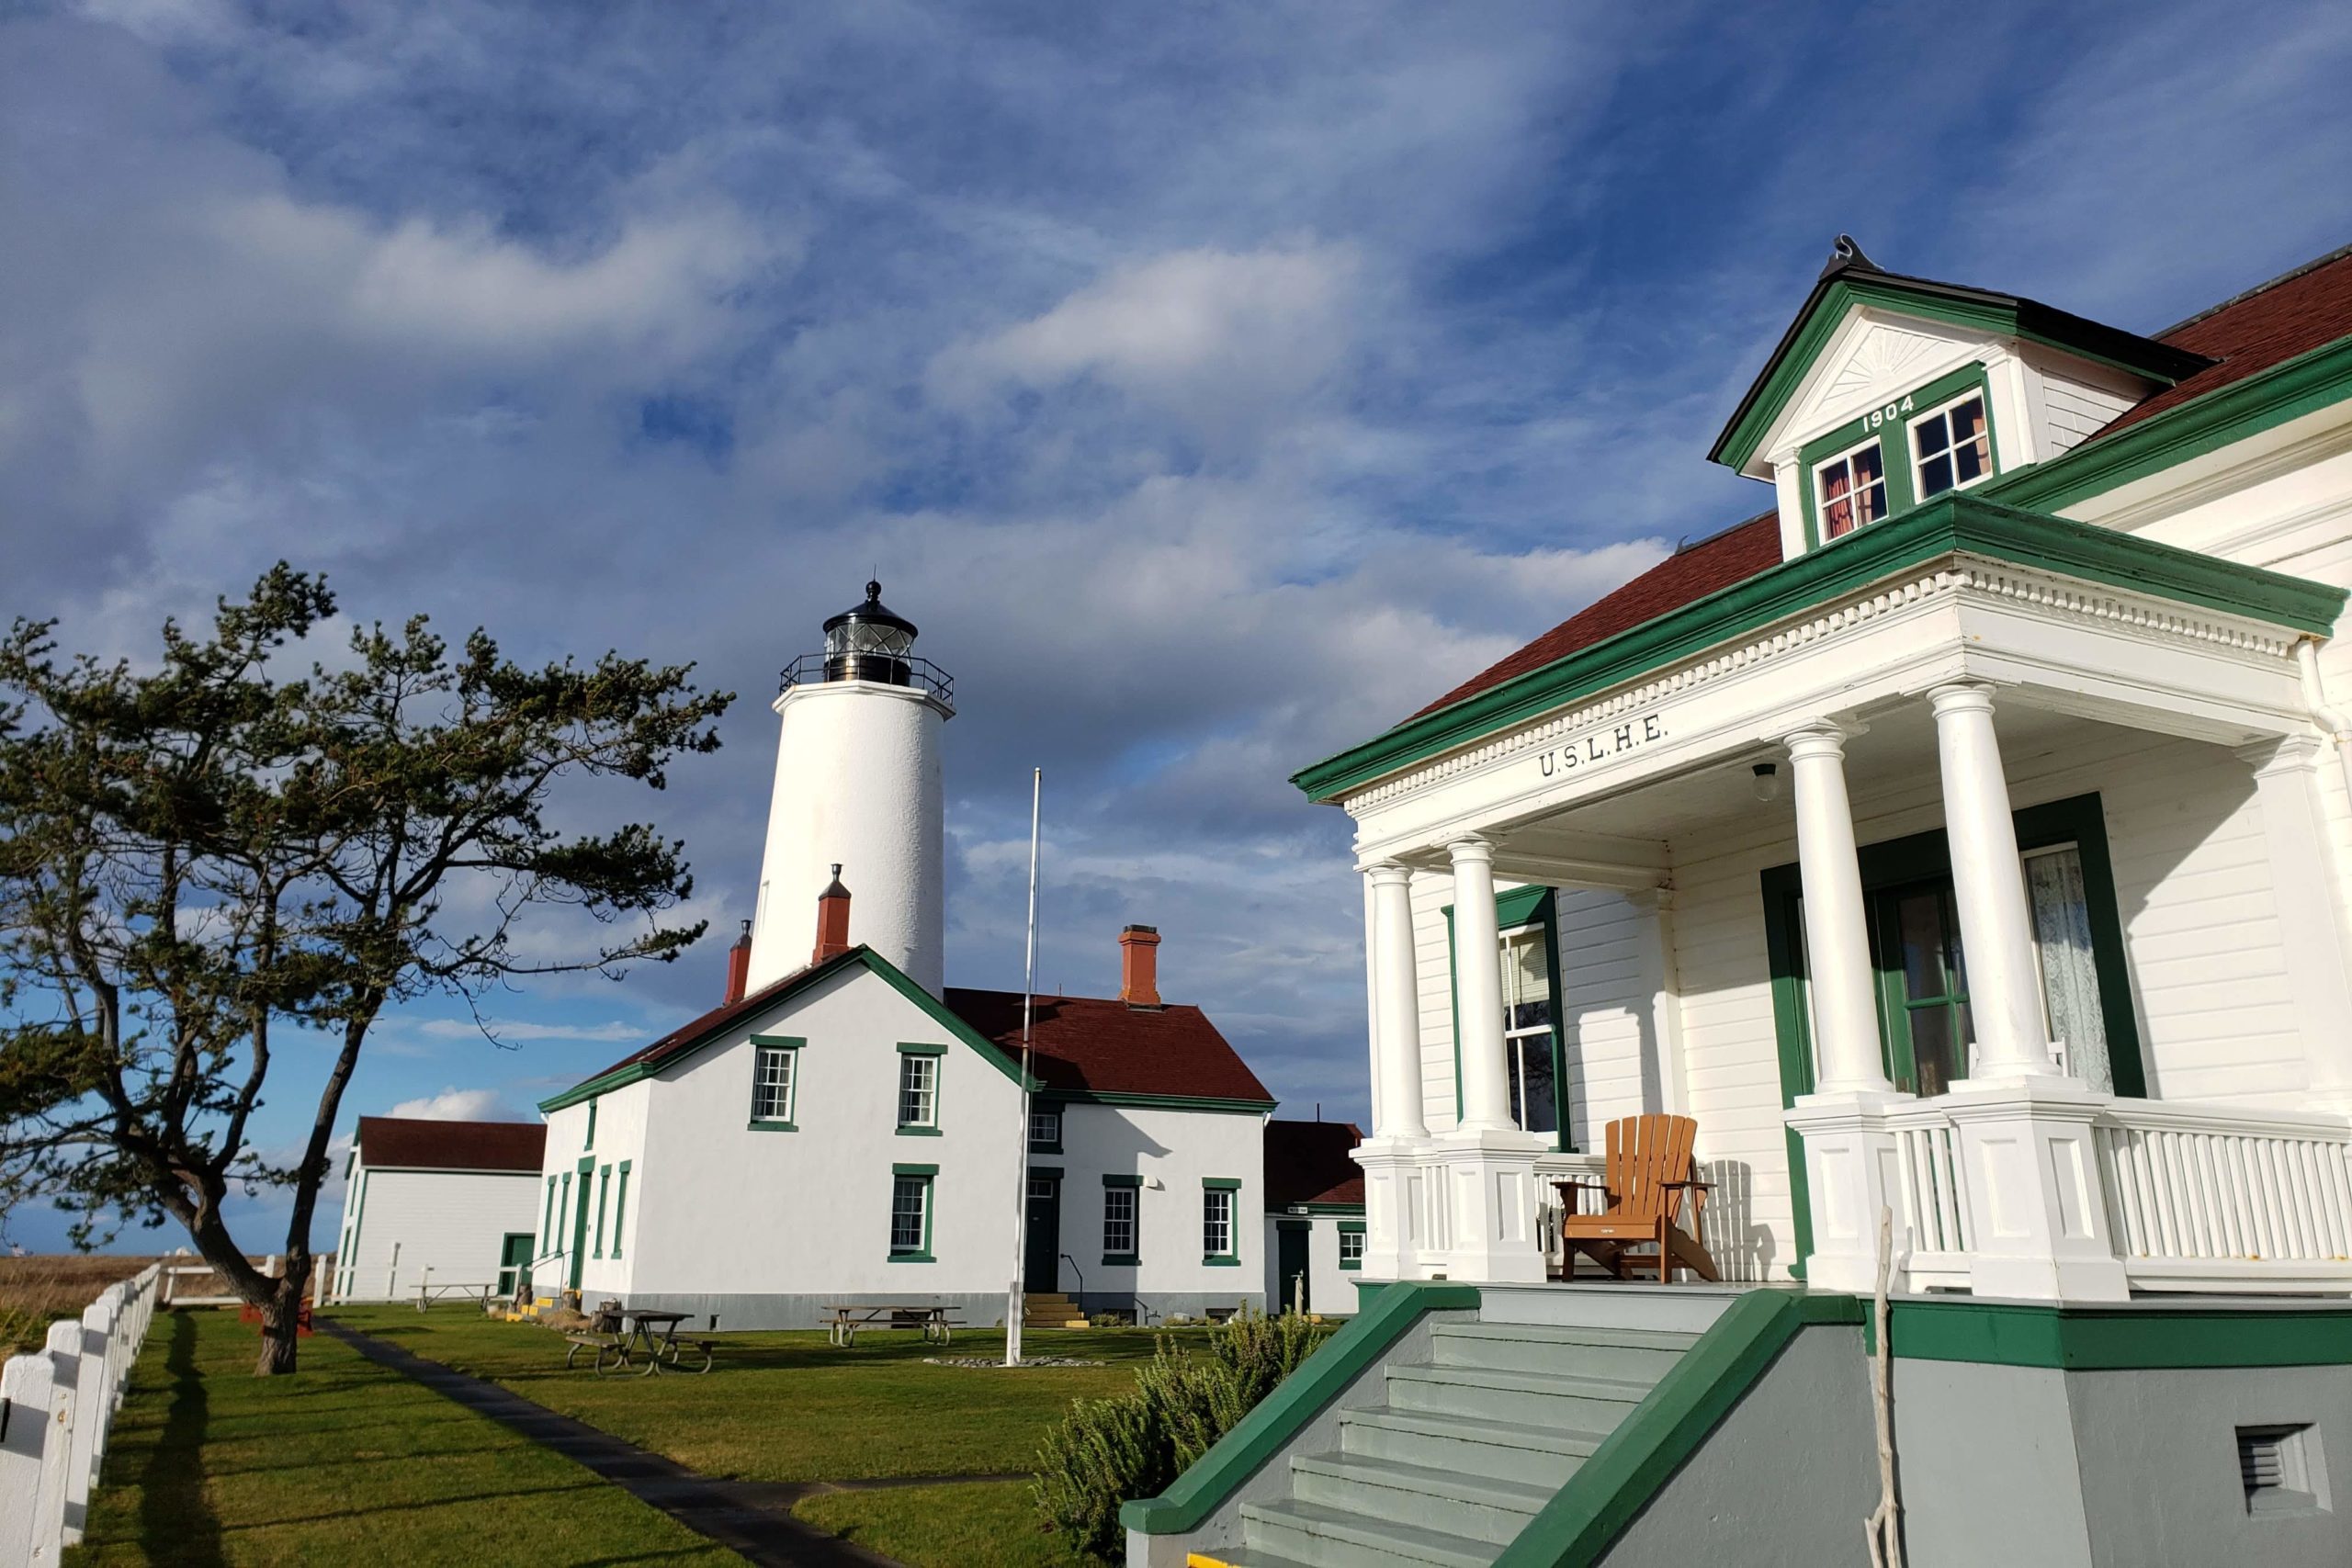 New Dungeness Lighthouse in Sequim, WA